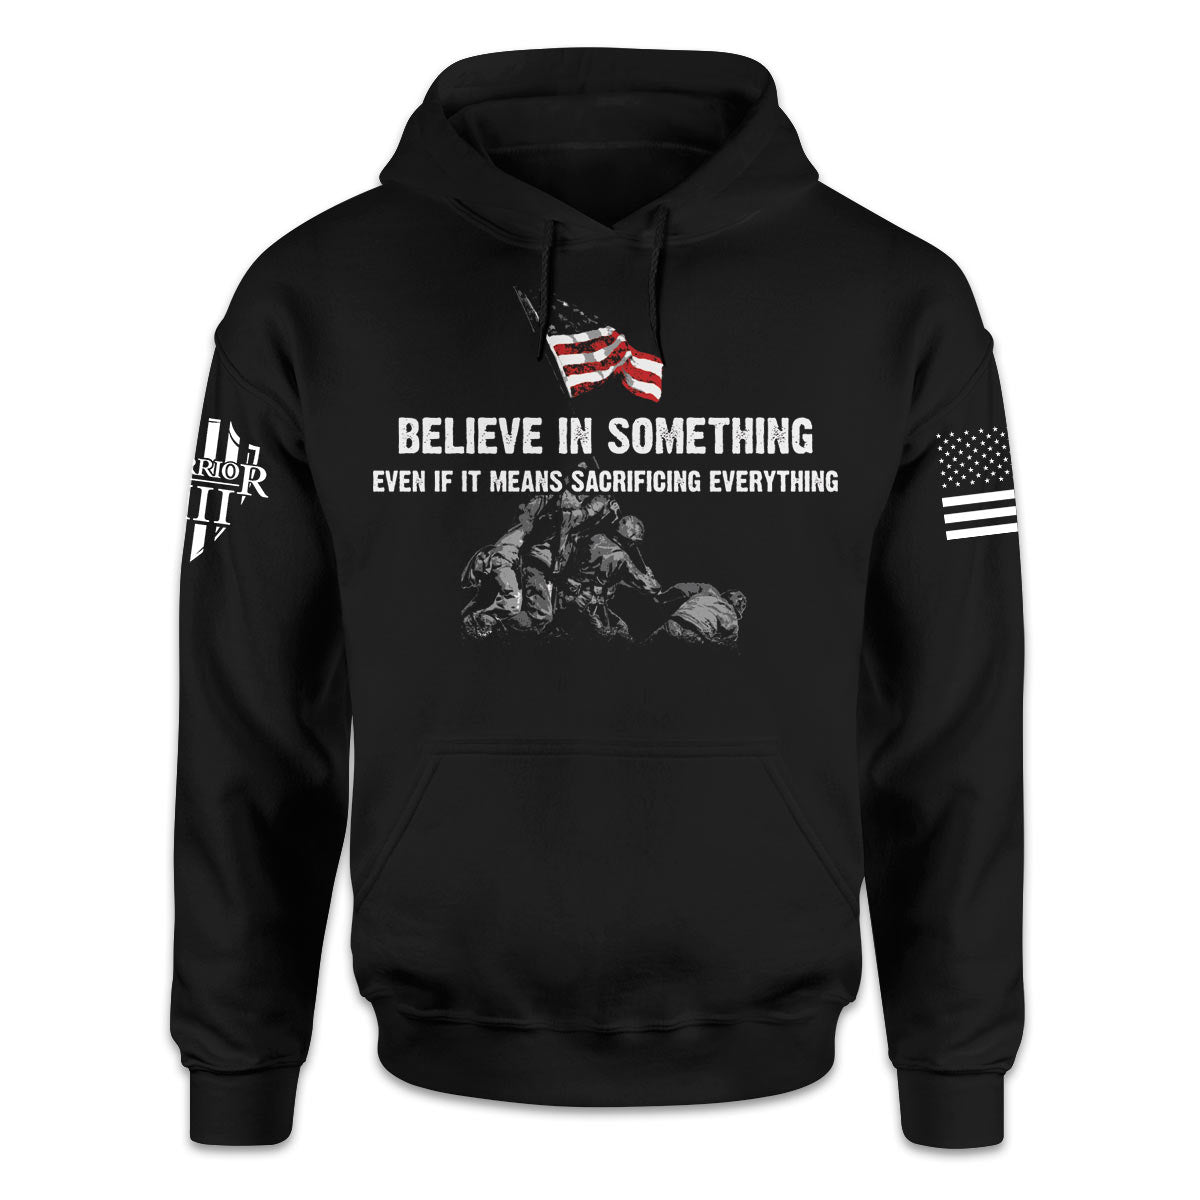 A black hoodie with the words "Believe In Something, Even If It Means Sacrificing Everything" with soldiers putting up the American flag printed on the front of the shirt.